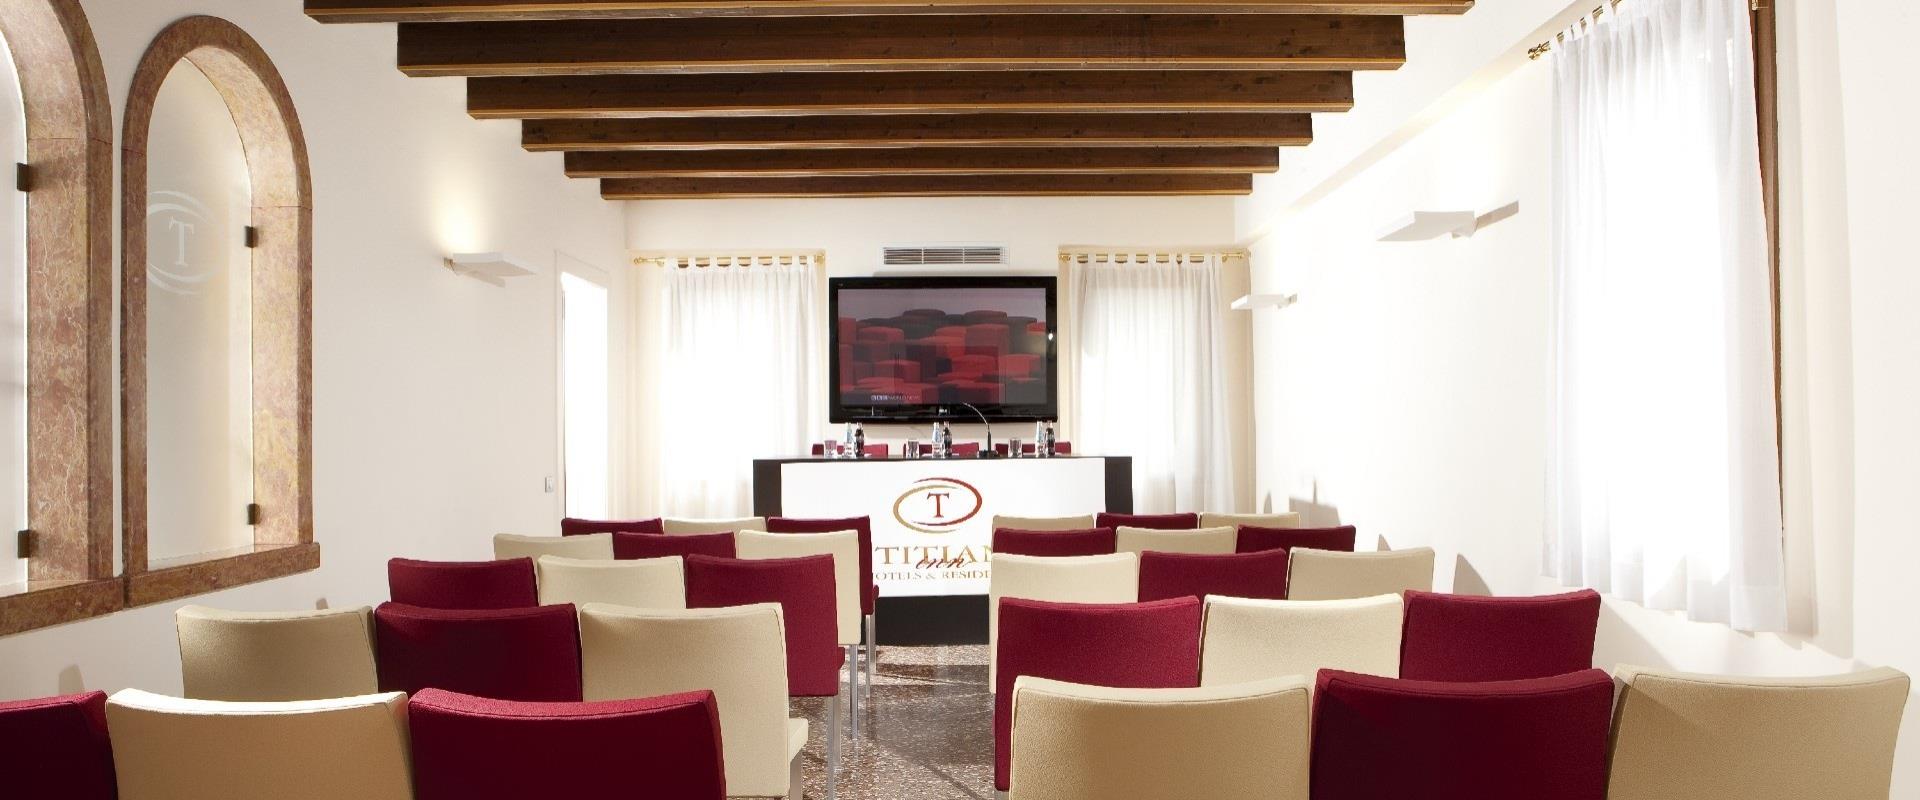 Organize your meeting in Treviso Silea with Titian Inn Hotel: discover the details of our meeting rooms!